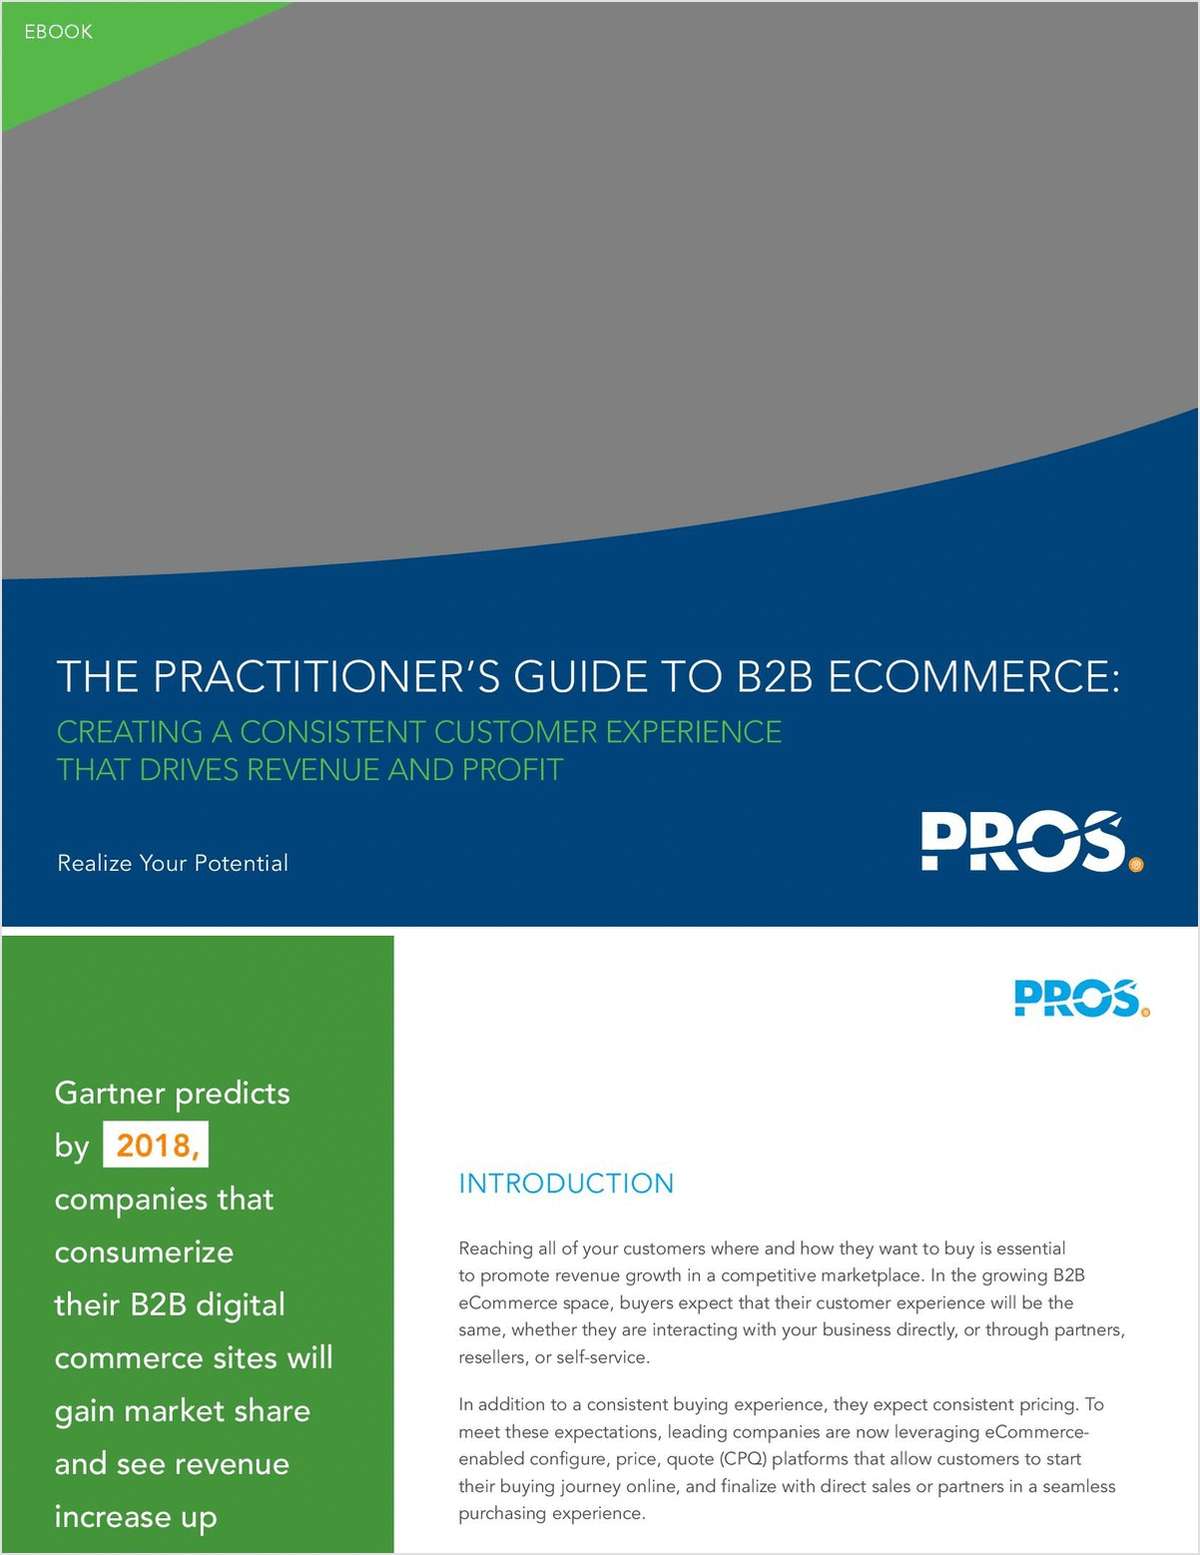 The Practitioner's Guide to B2B eCommerce